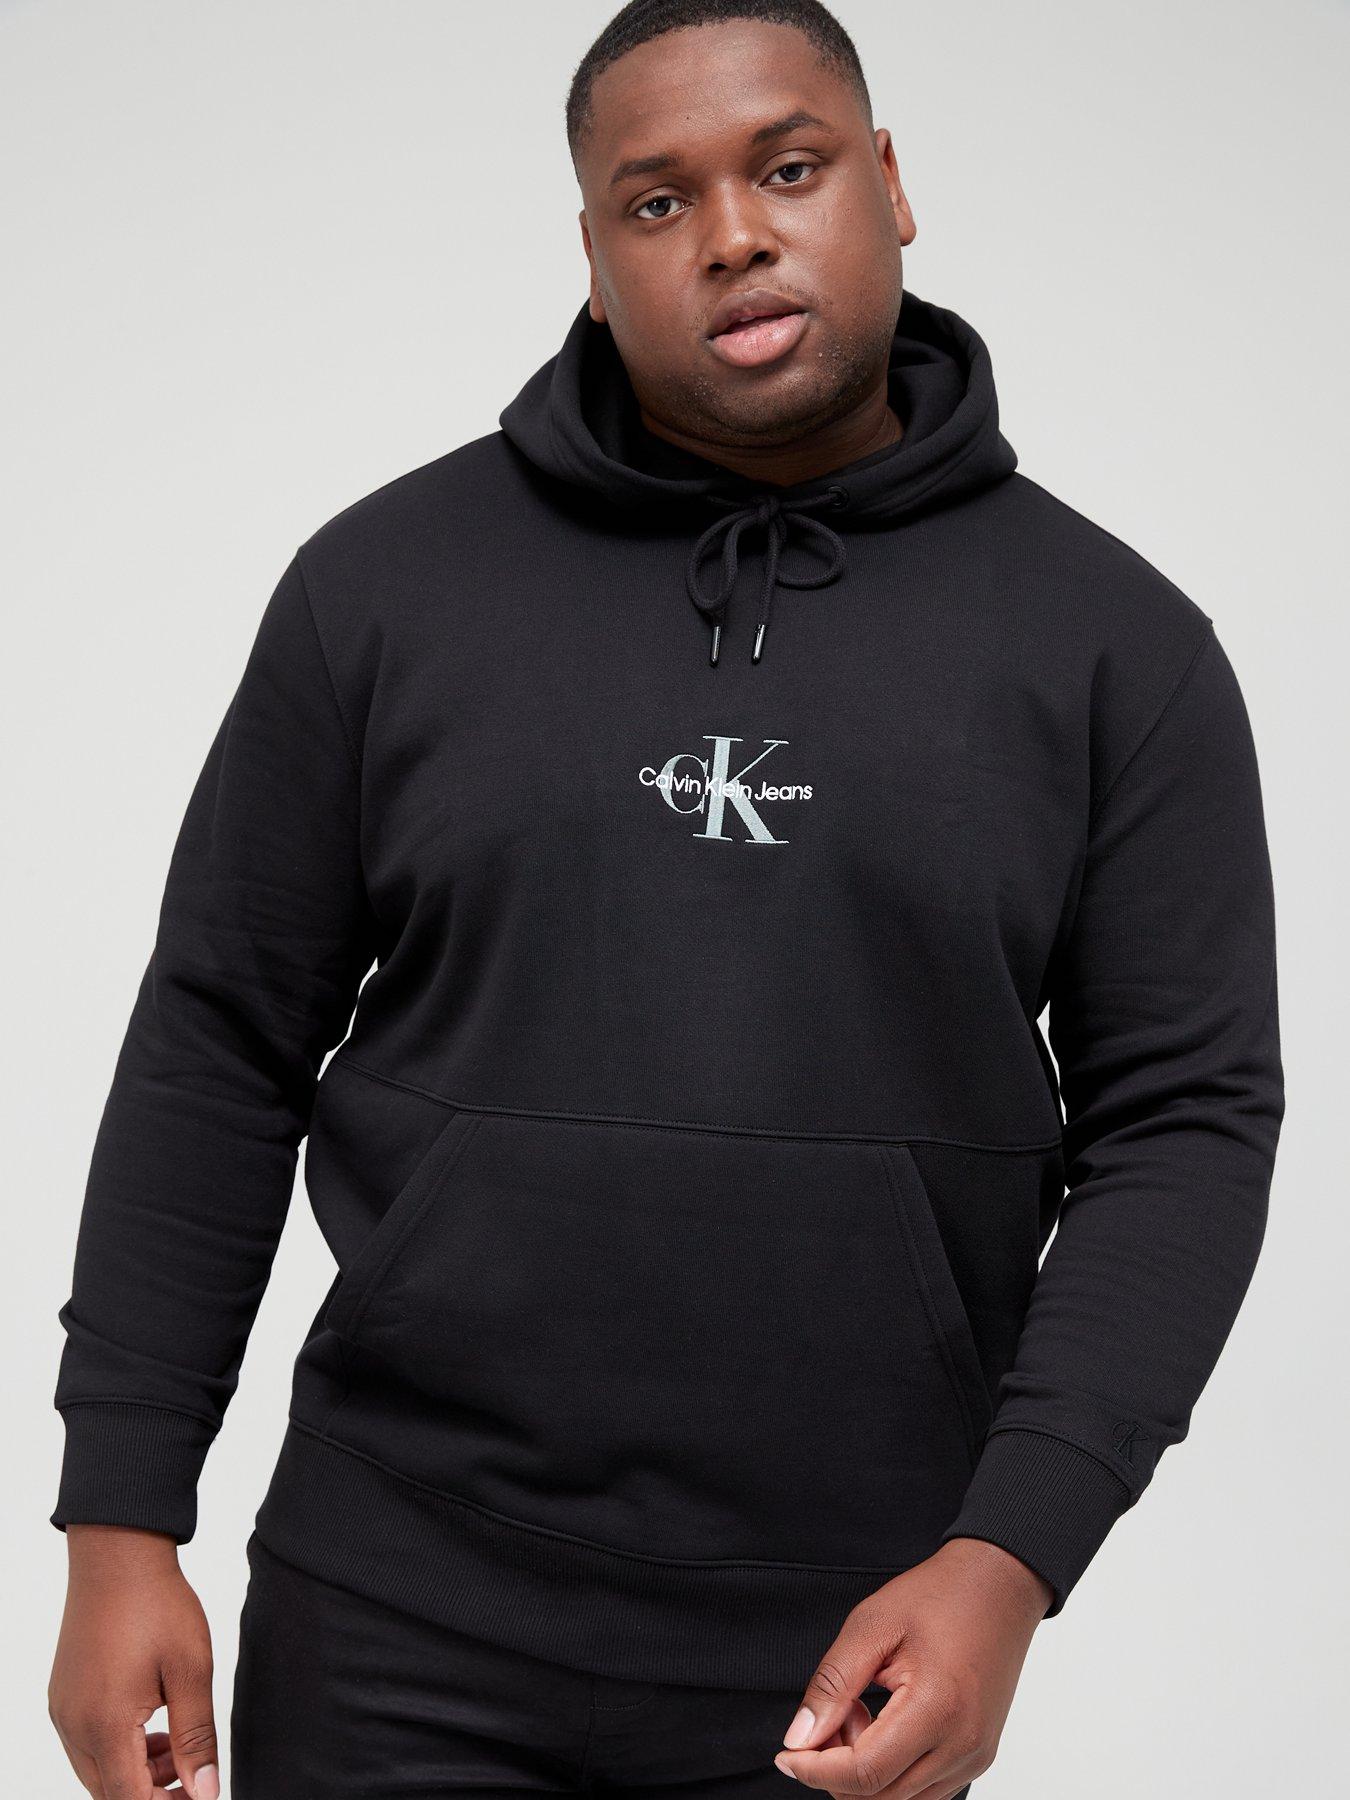 Mens Clothing Activewear Black gym and workout clothes Hoodies for Men Calvin Klein Cotton Small Chest Logo Hoodie Hooded Sweatshirt in ck Black 